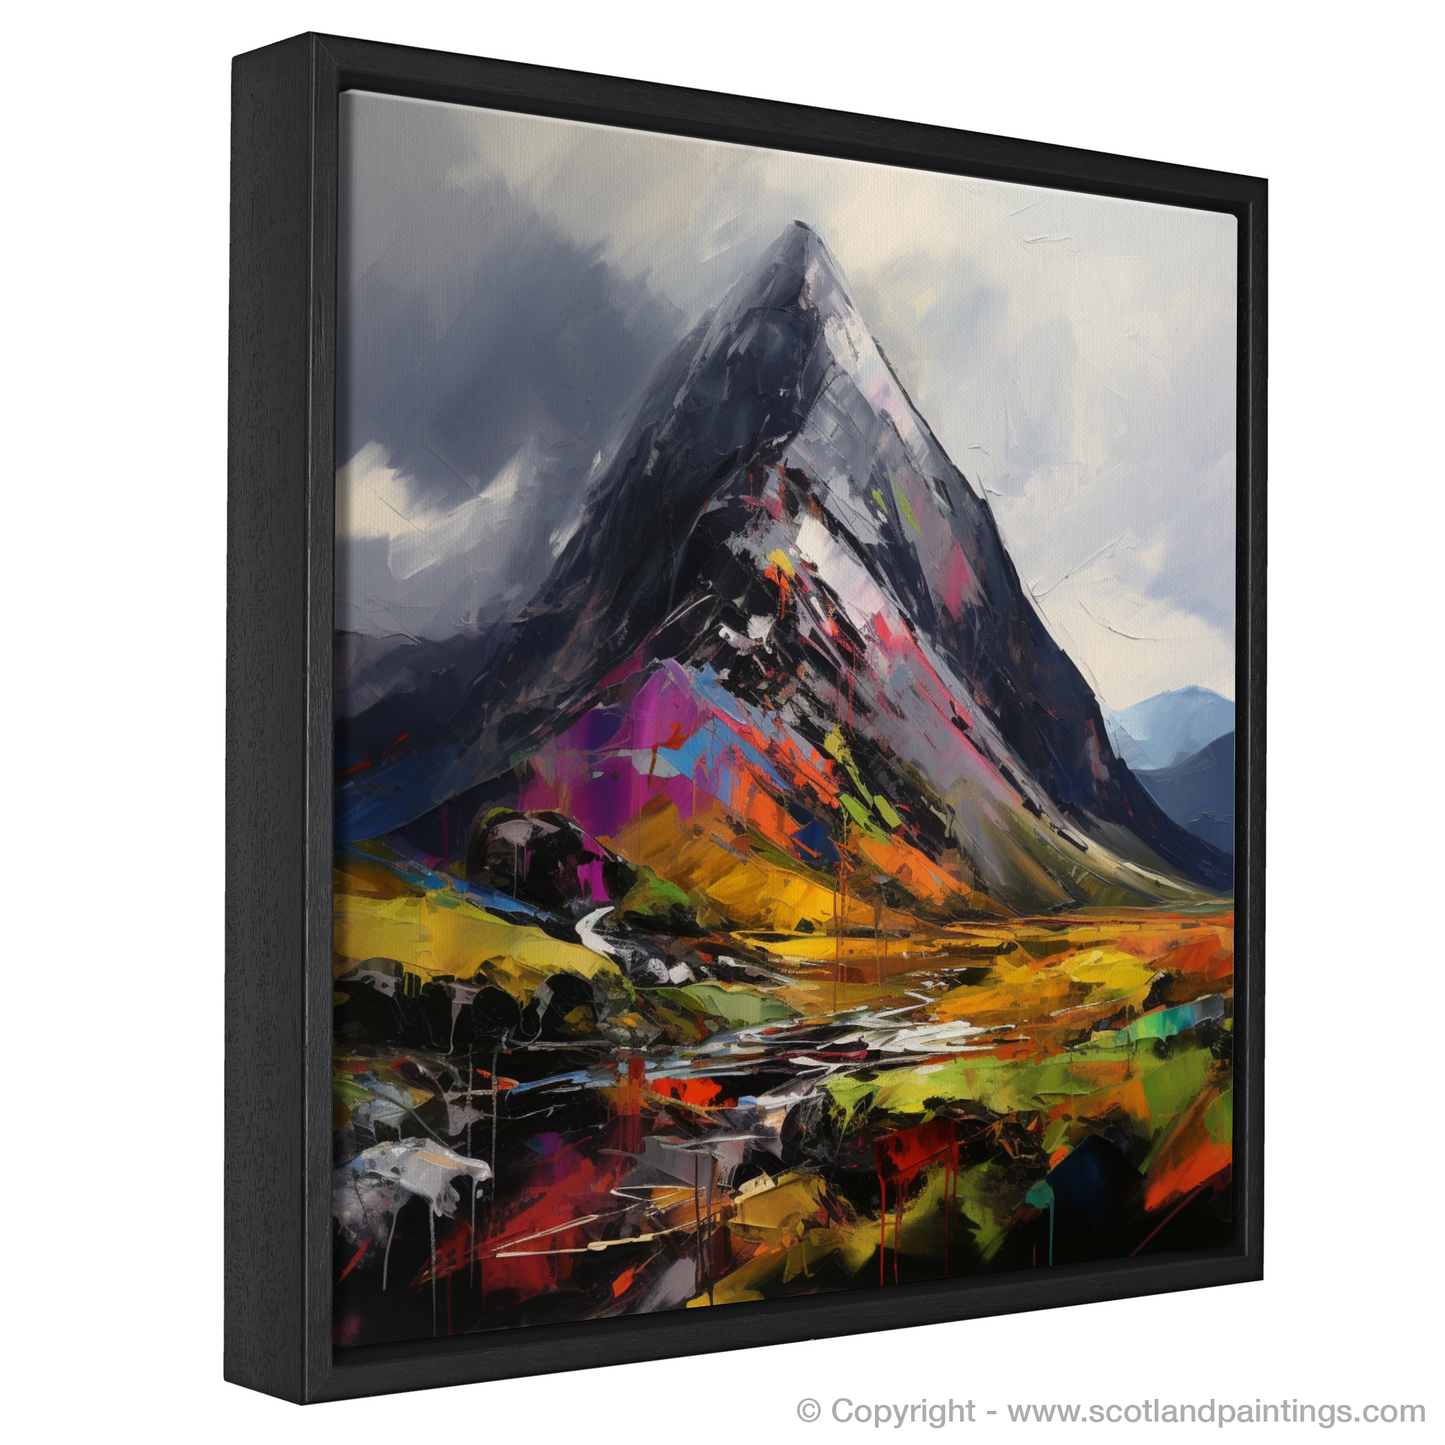 Painting and Art Print of Stob Dubh (Buachaille Etive Beag) entitled "Majestic Stob Dubh in Expressionist Hues".